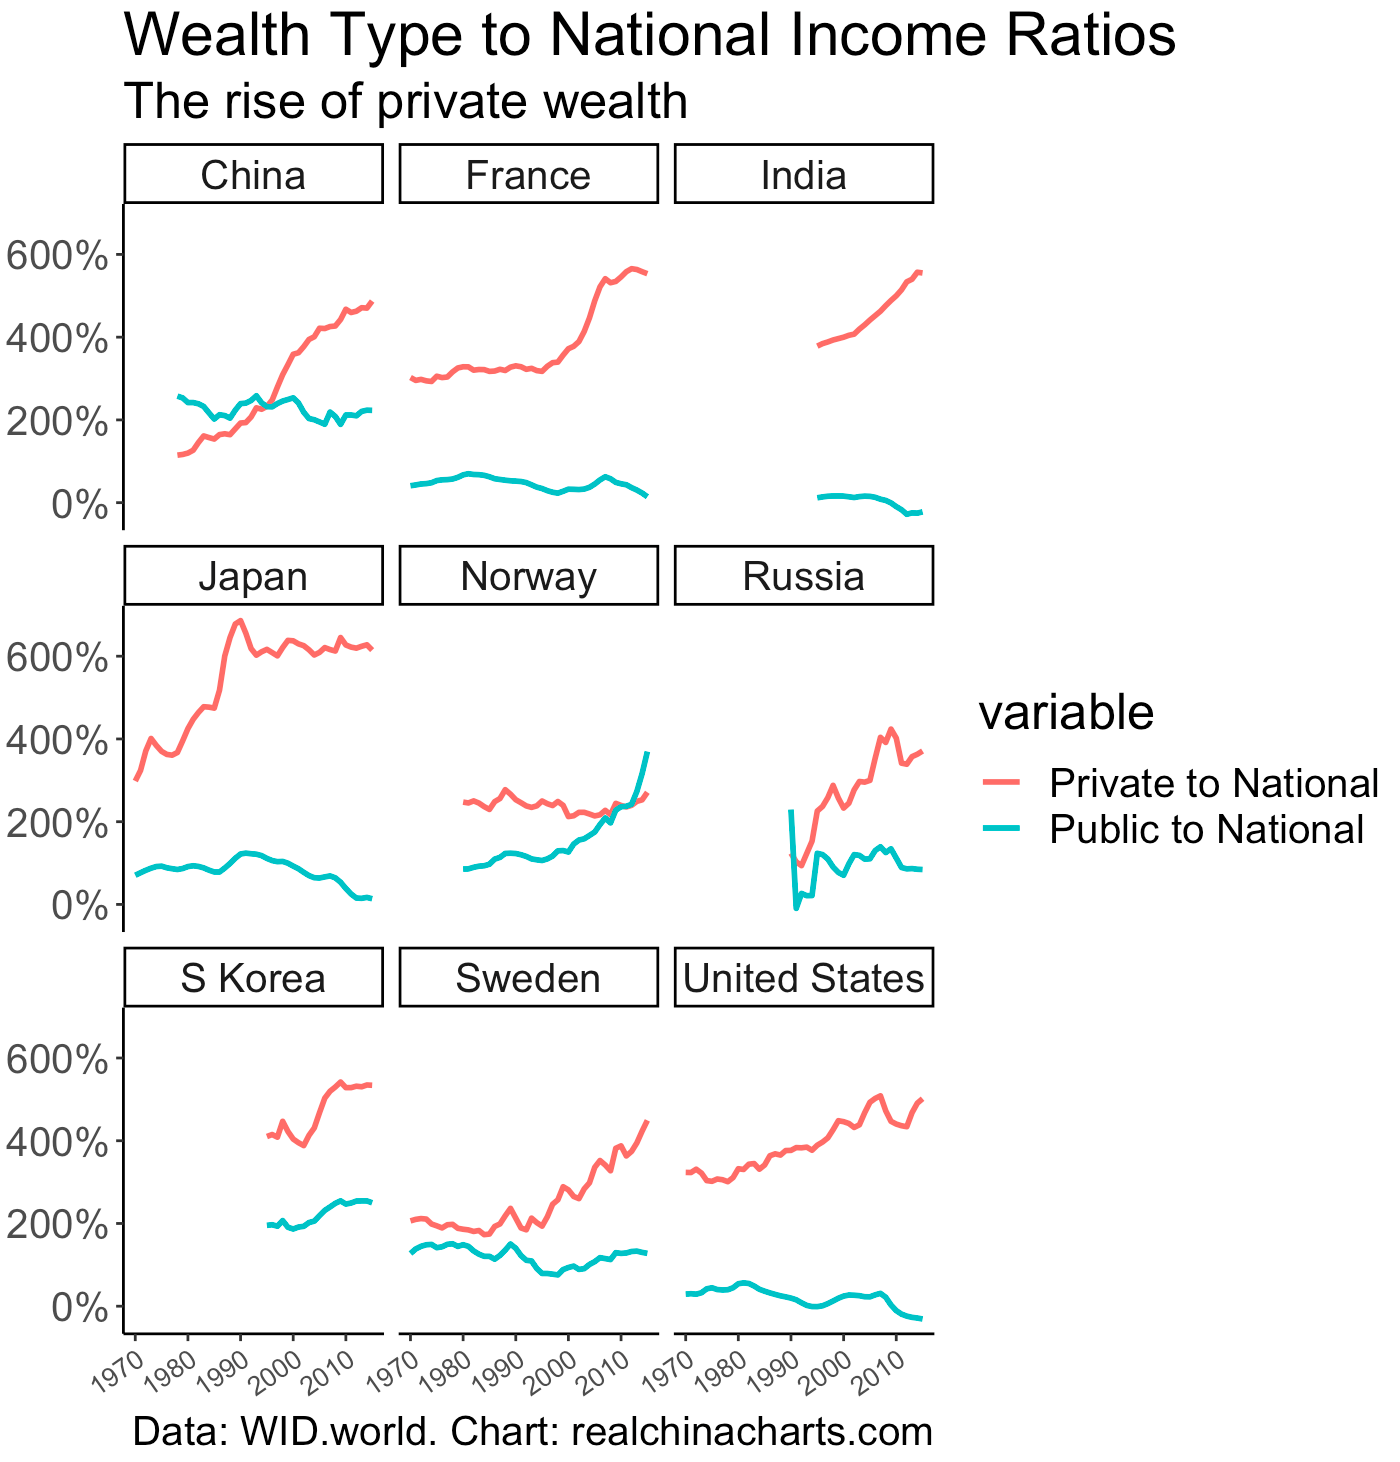 Wealth over income ratios for private and public wealth